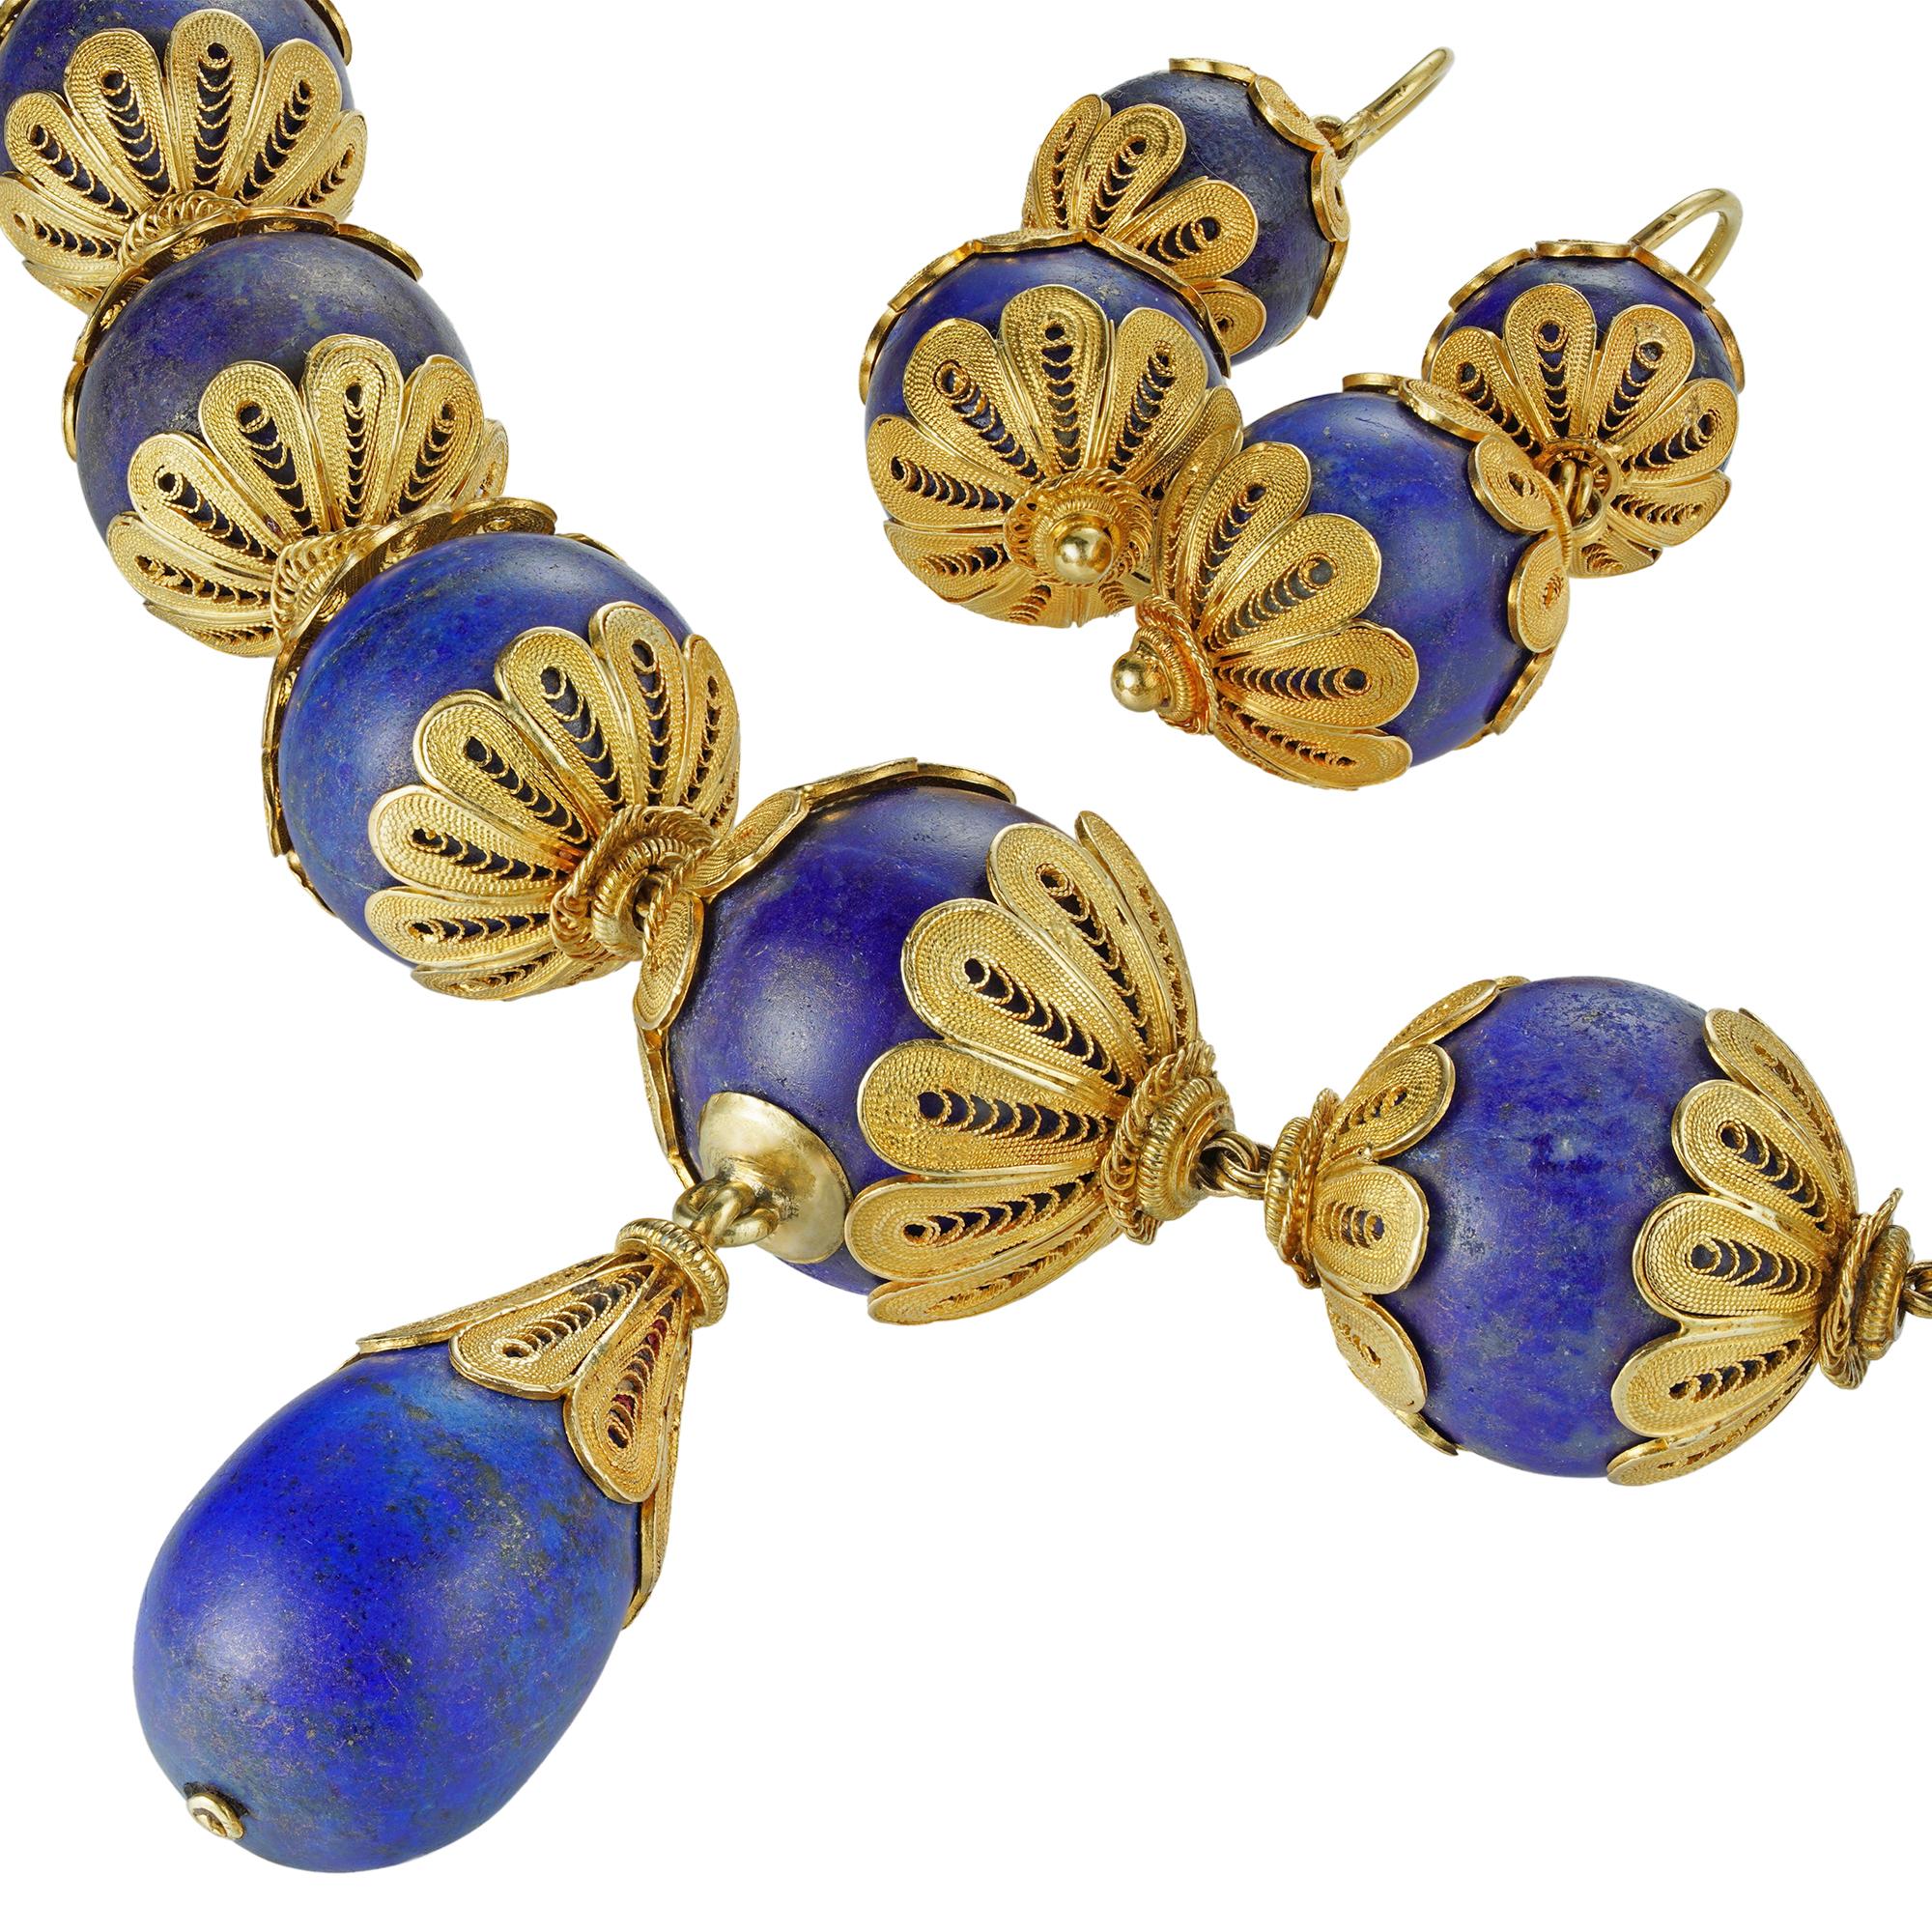 A 19th Century lapis lazuli bead and gold demi-parure, the necklace consisted of twenty four graduated lapis beads measuring from 17.8mm to 13.6mm, with yellow gold filigree decorations, suspending a lapis drop with a gold filigree cap, the matching